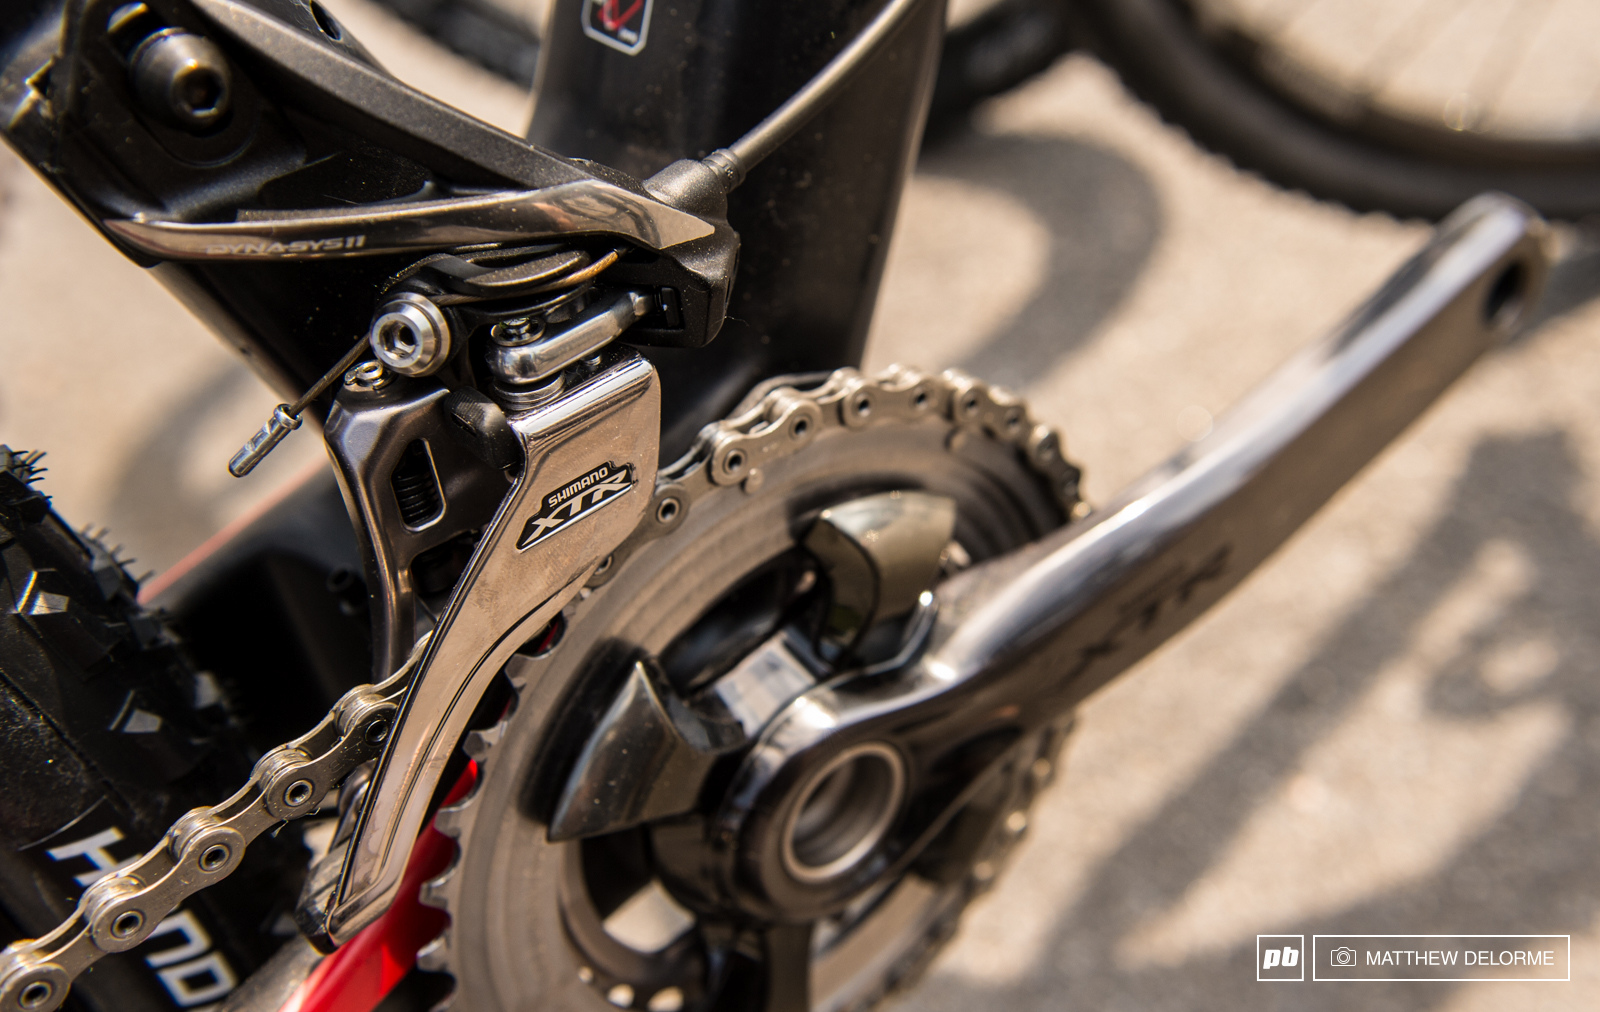 Shimano's new side-pull front derailleur delivers super strong, quick shifting.